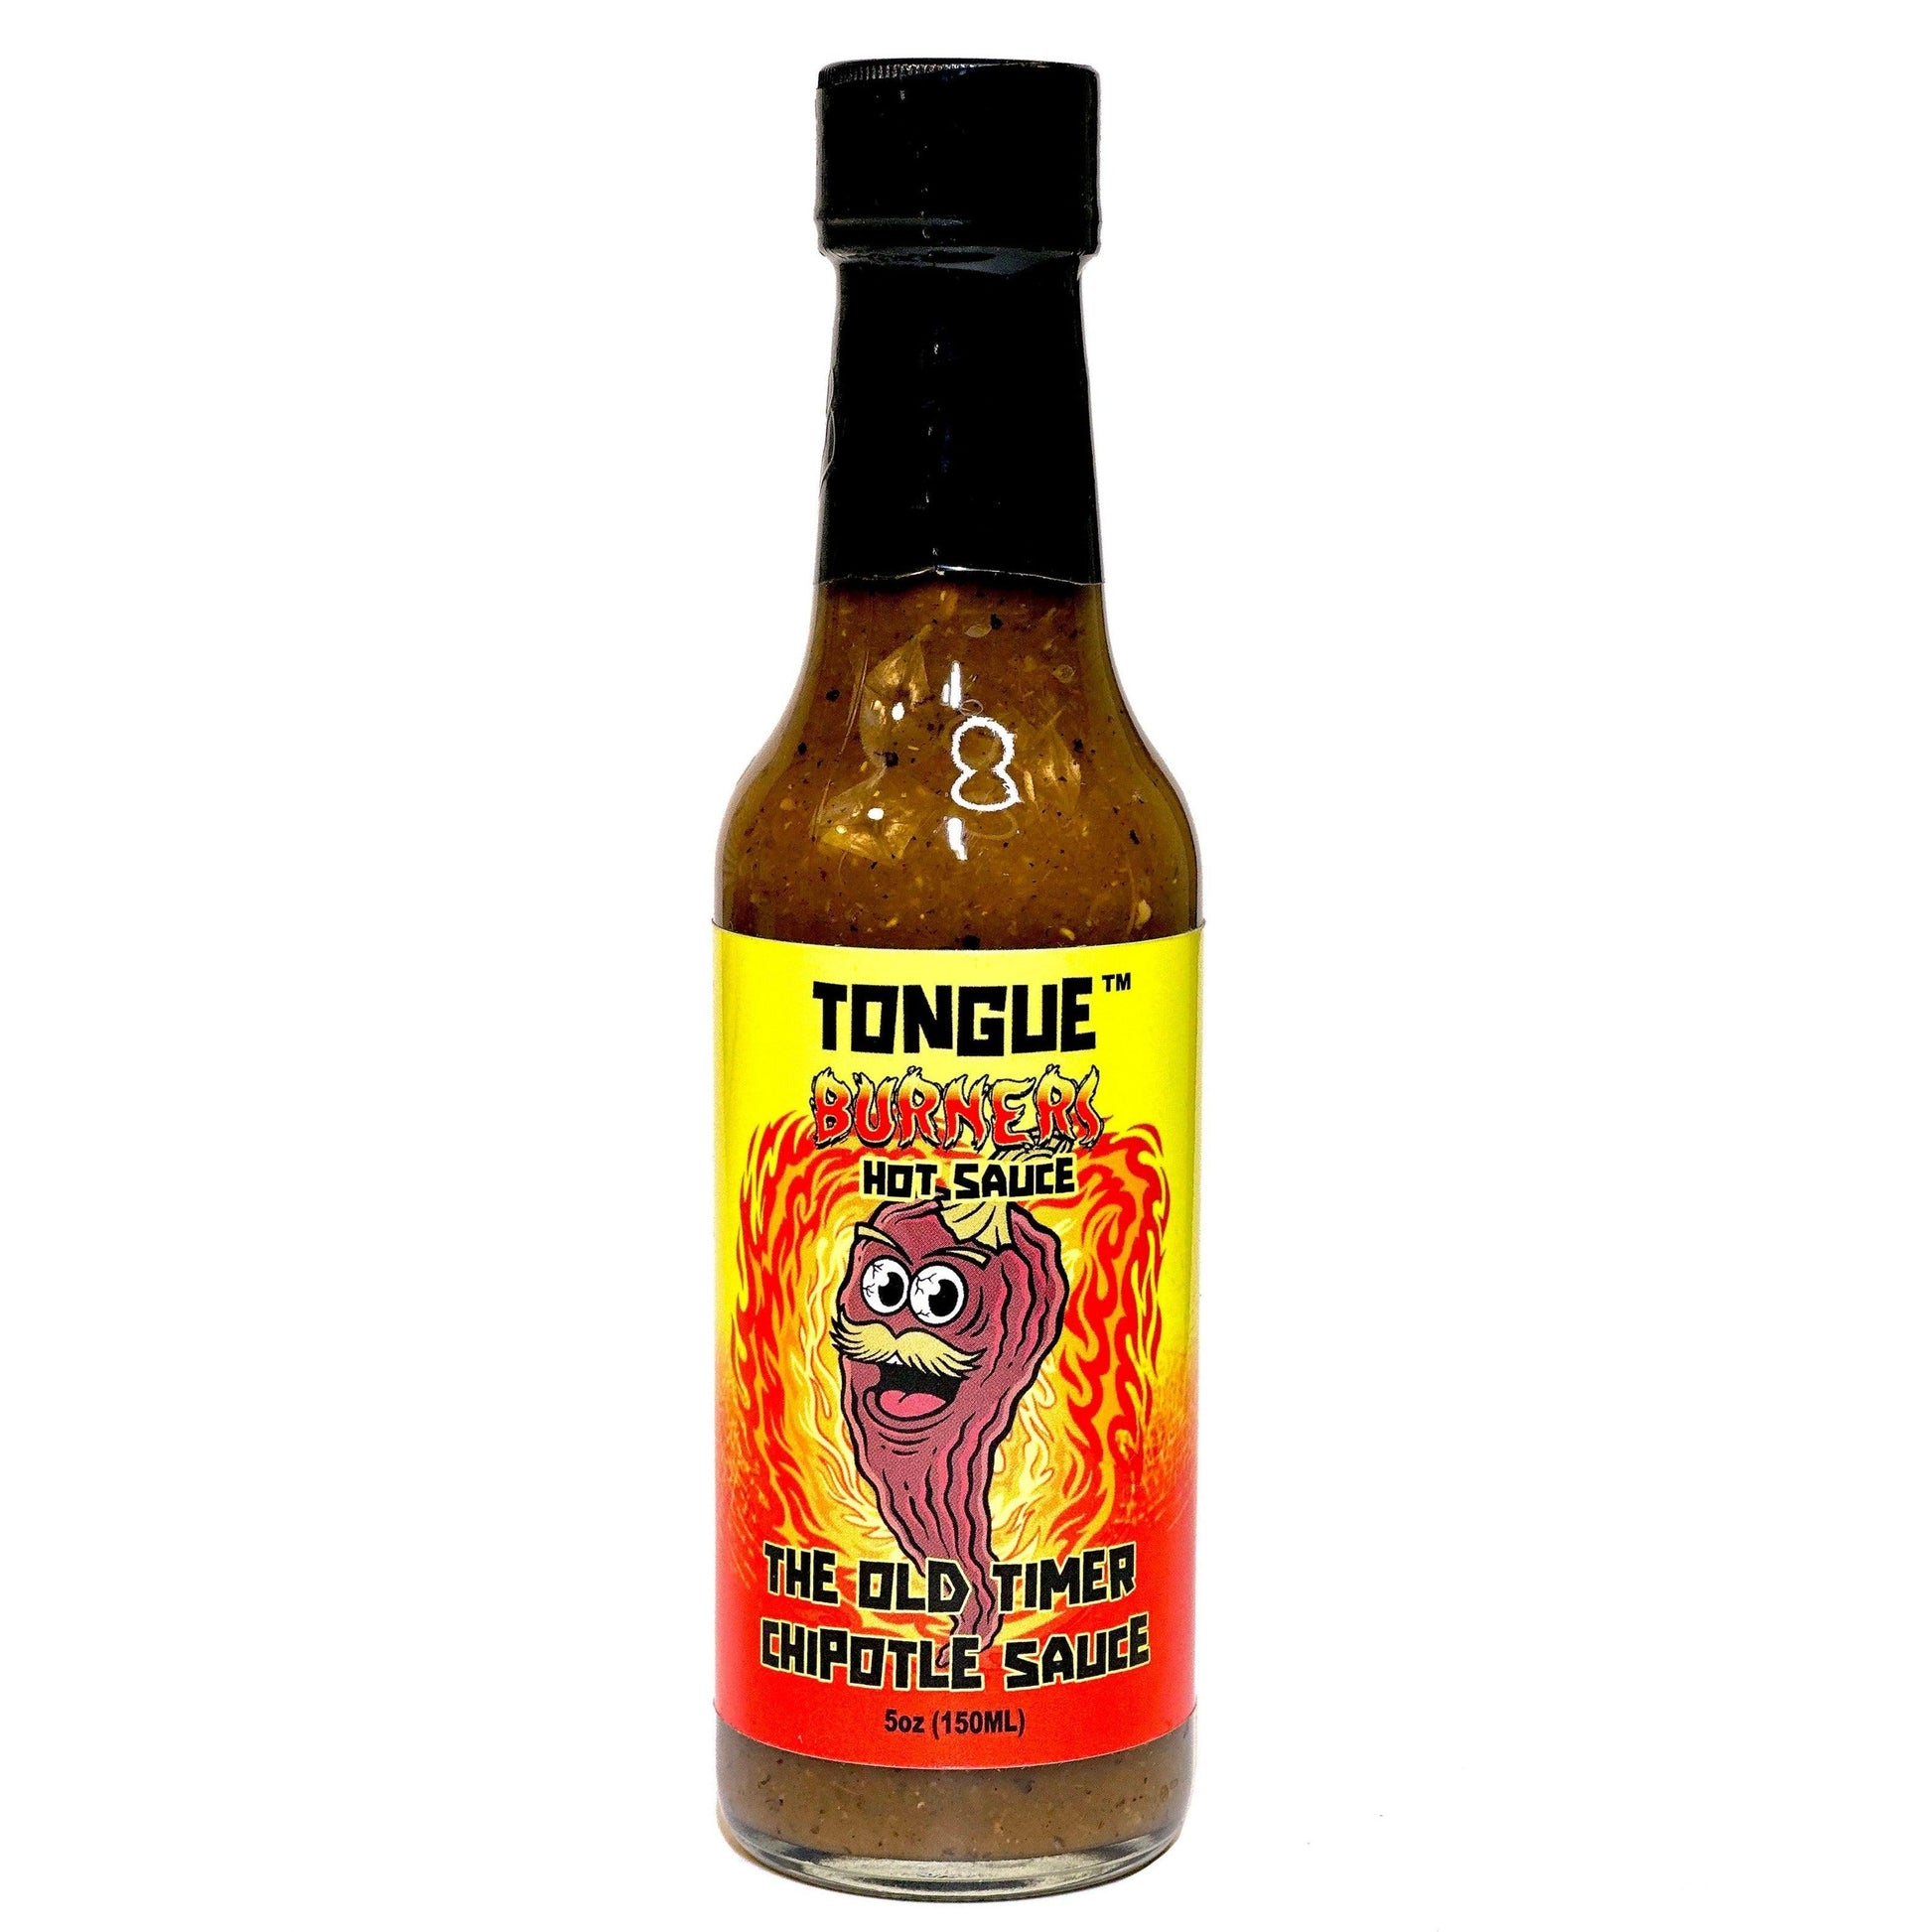 Chipotle, The Old Timer Hot Sauce┋Tongue Burners Hot Sauce fl 5oz - Tongue Burners Hot Sauce